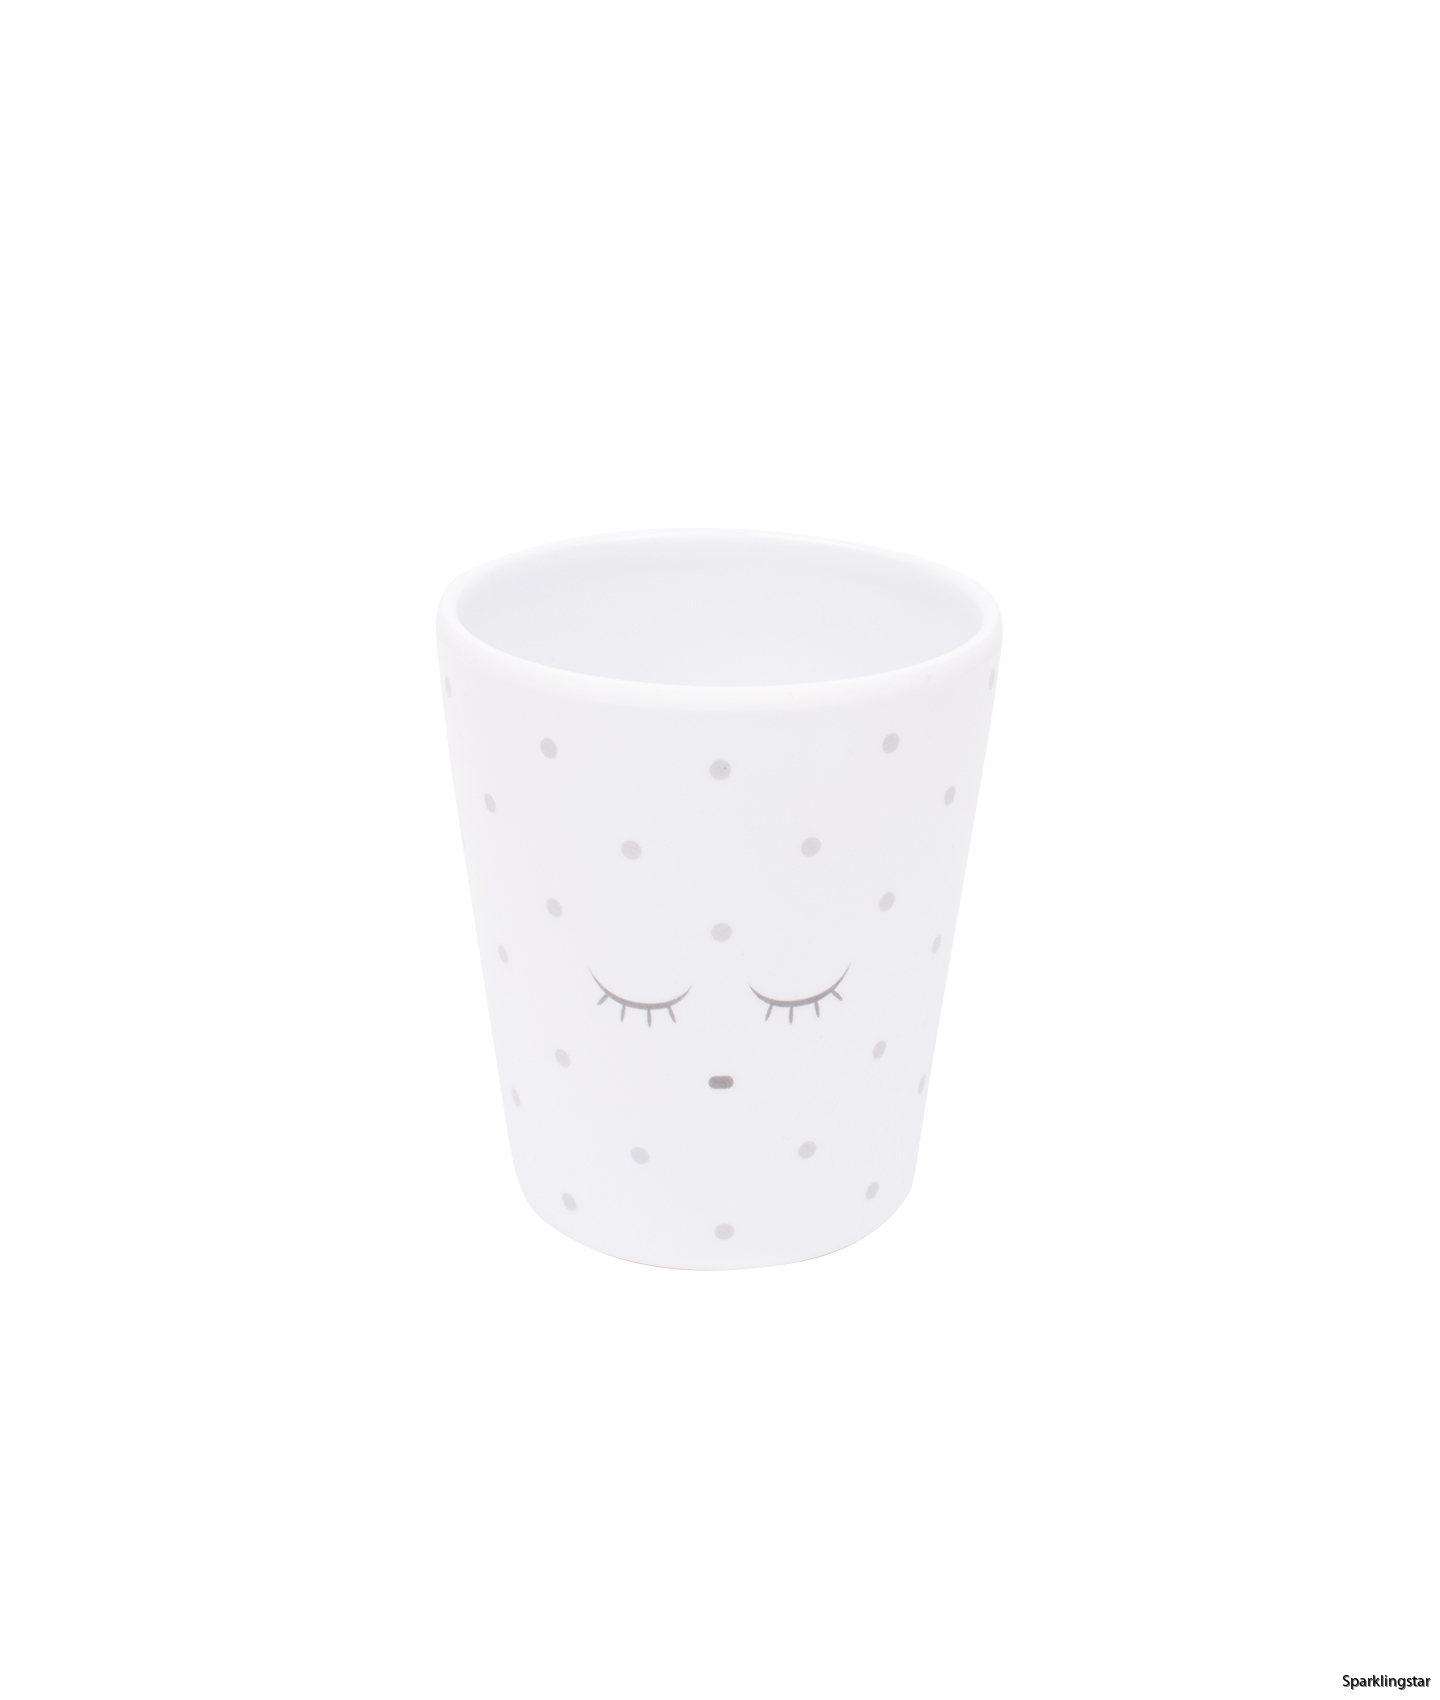 Livly Cup White / Silver Dots